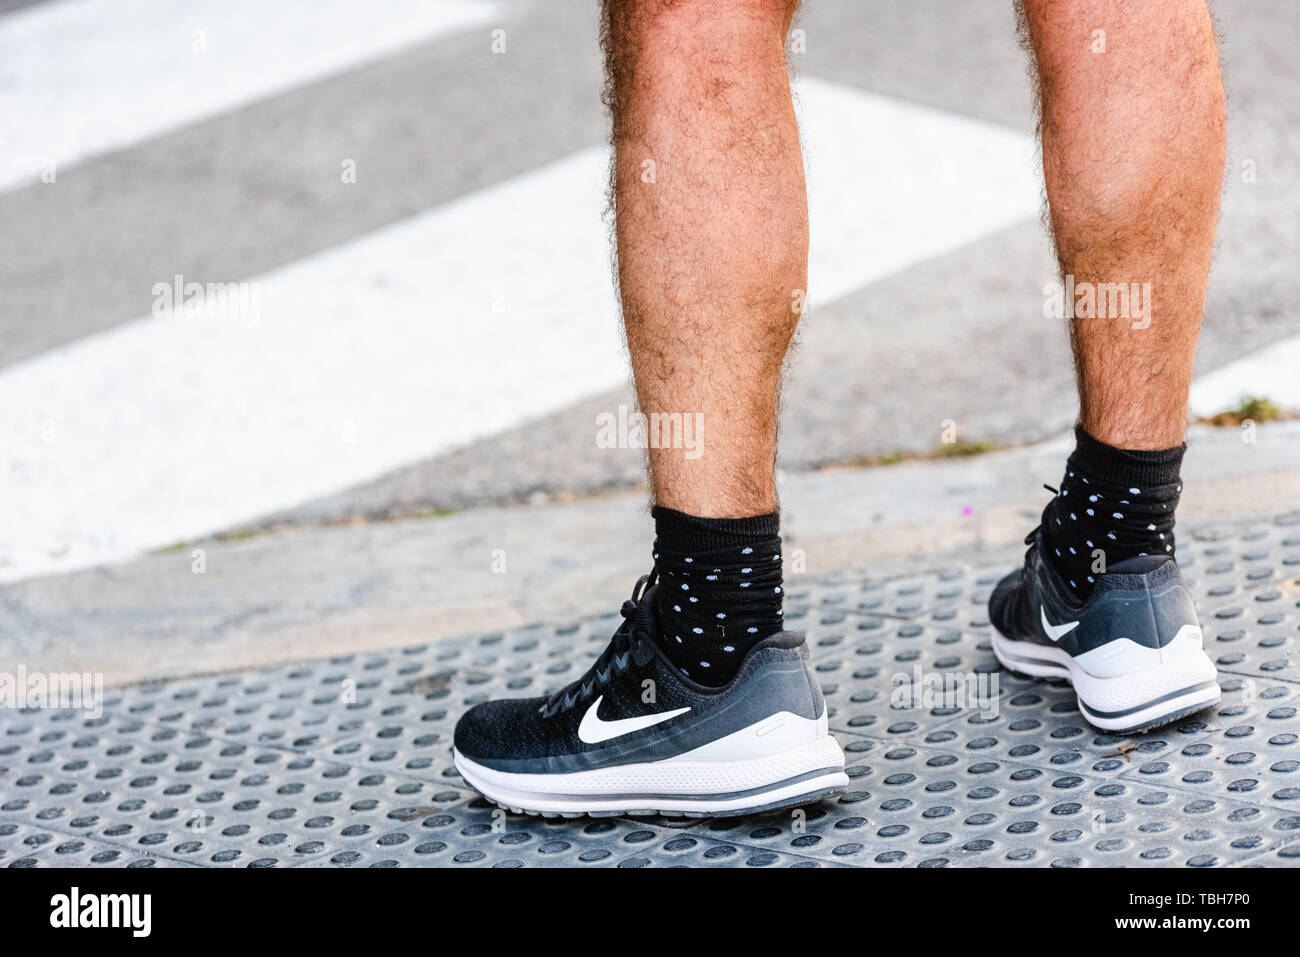 Valencia, Spain - May 28, 2019: A runner wearing a running shoe last model  of the american brand Nike Stock Photo - Alamy